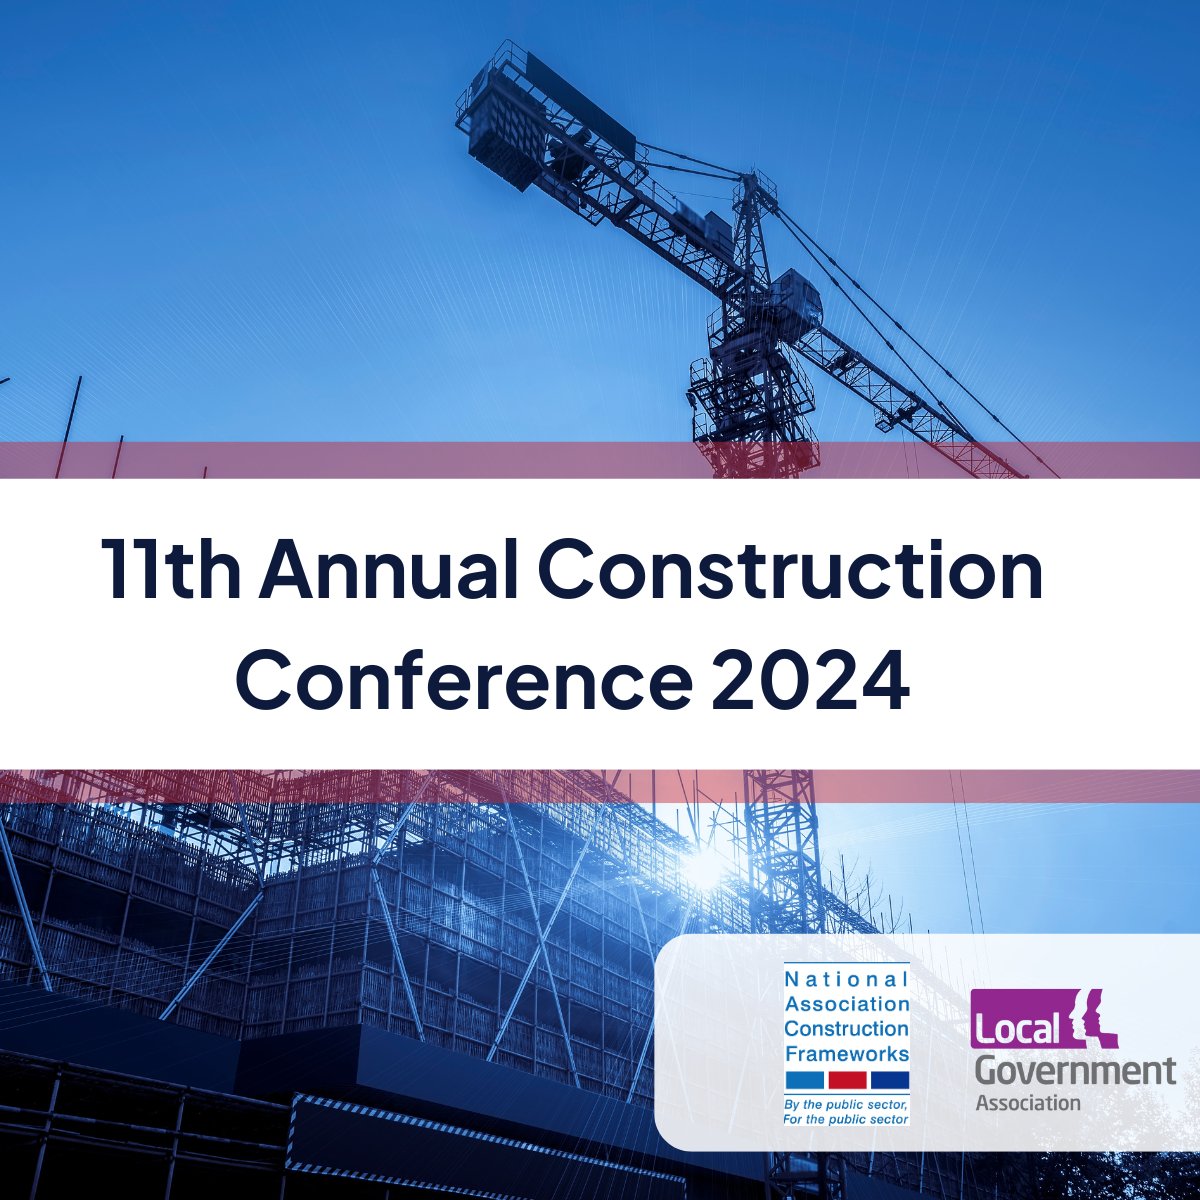 Delighted to host the 11th Annual Construction Conference in Leeds today in partnership with the National Association of Construction Frameworks (NACF) & @LGAcomms, which includes expert-led sessions on making #publicsector #procurement more efficient, sustainable and inclusive.